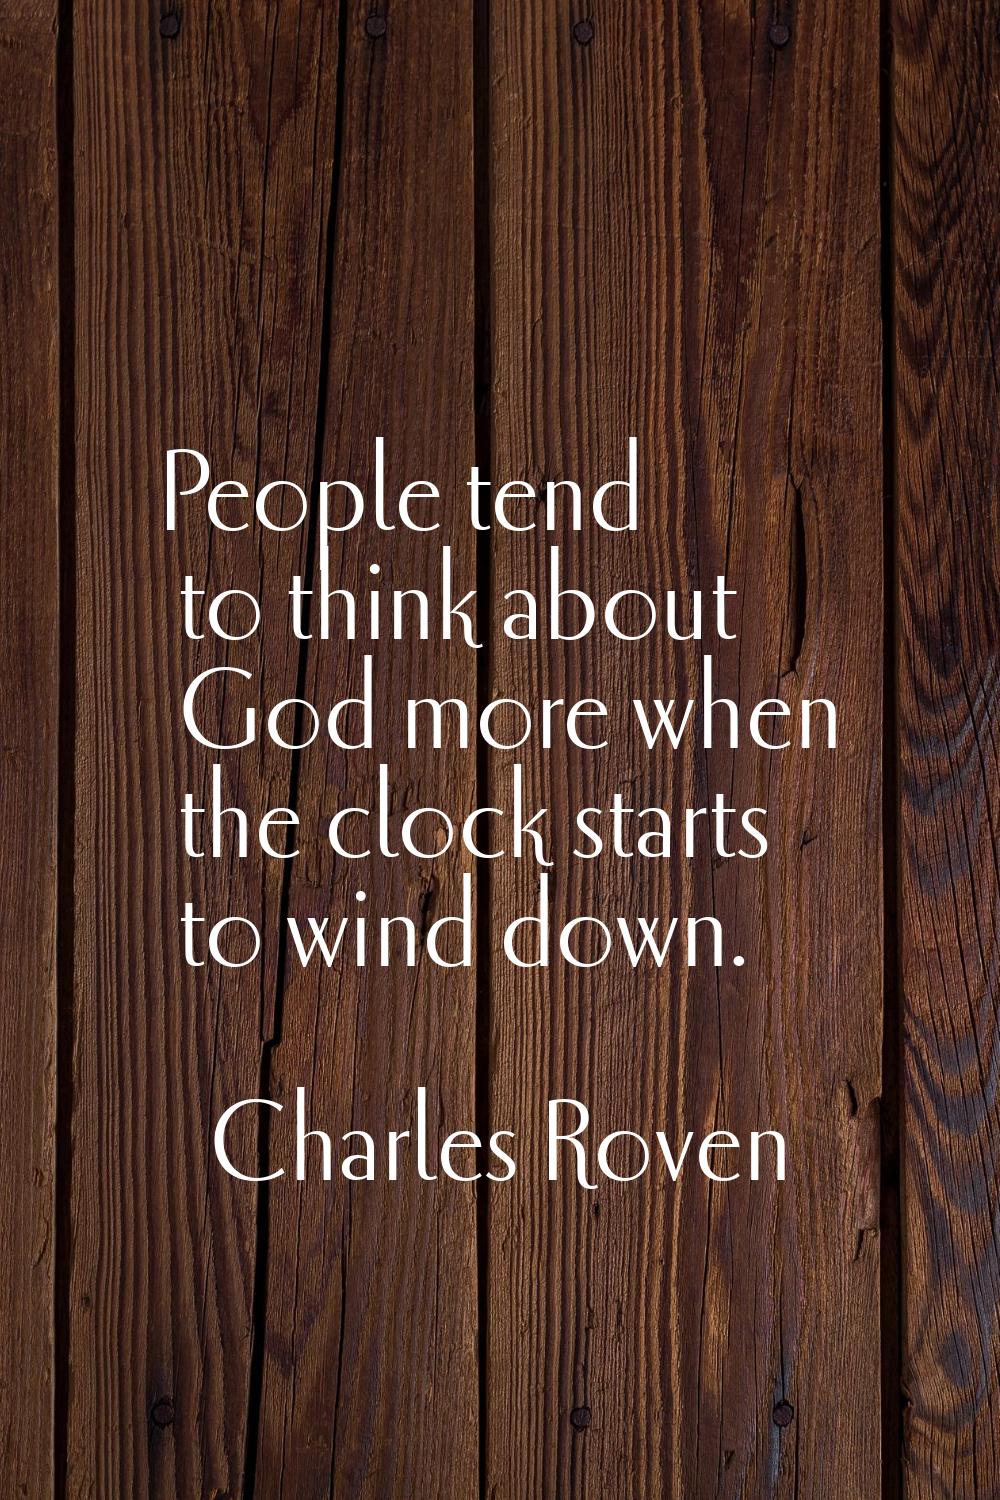 People tend to think about God more when the clock starts to wind down.